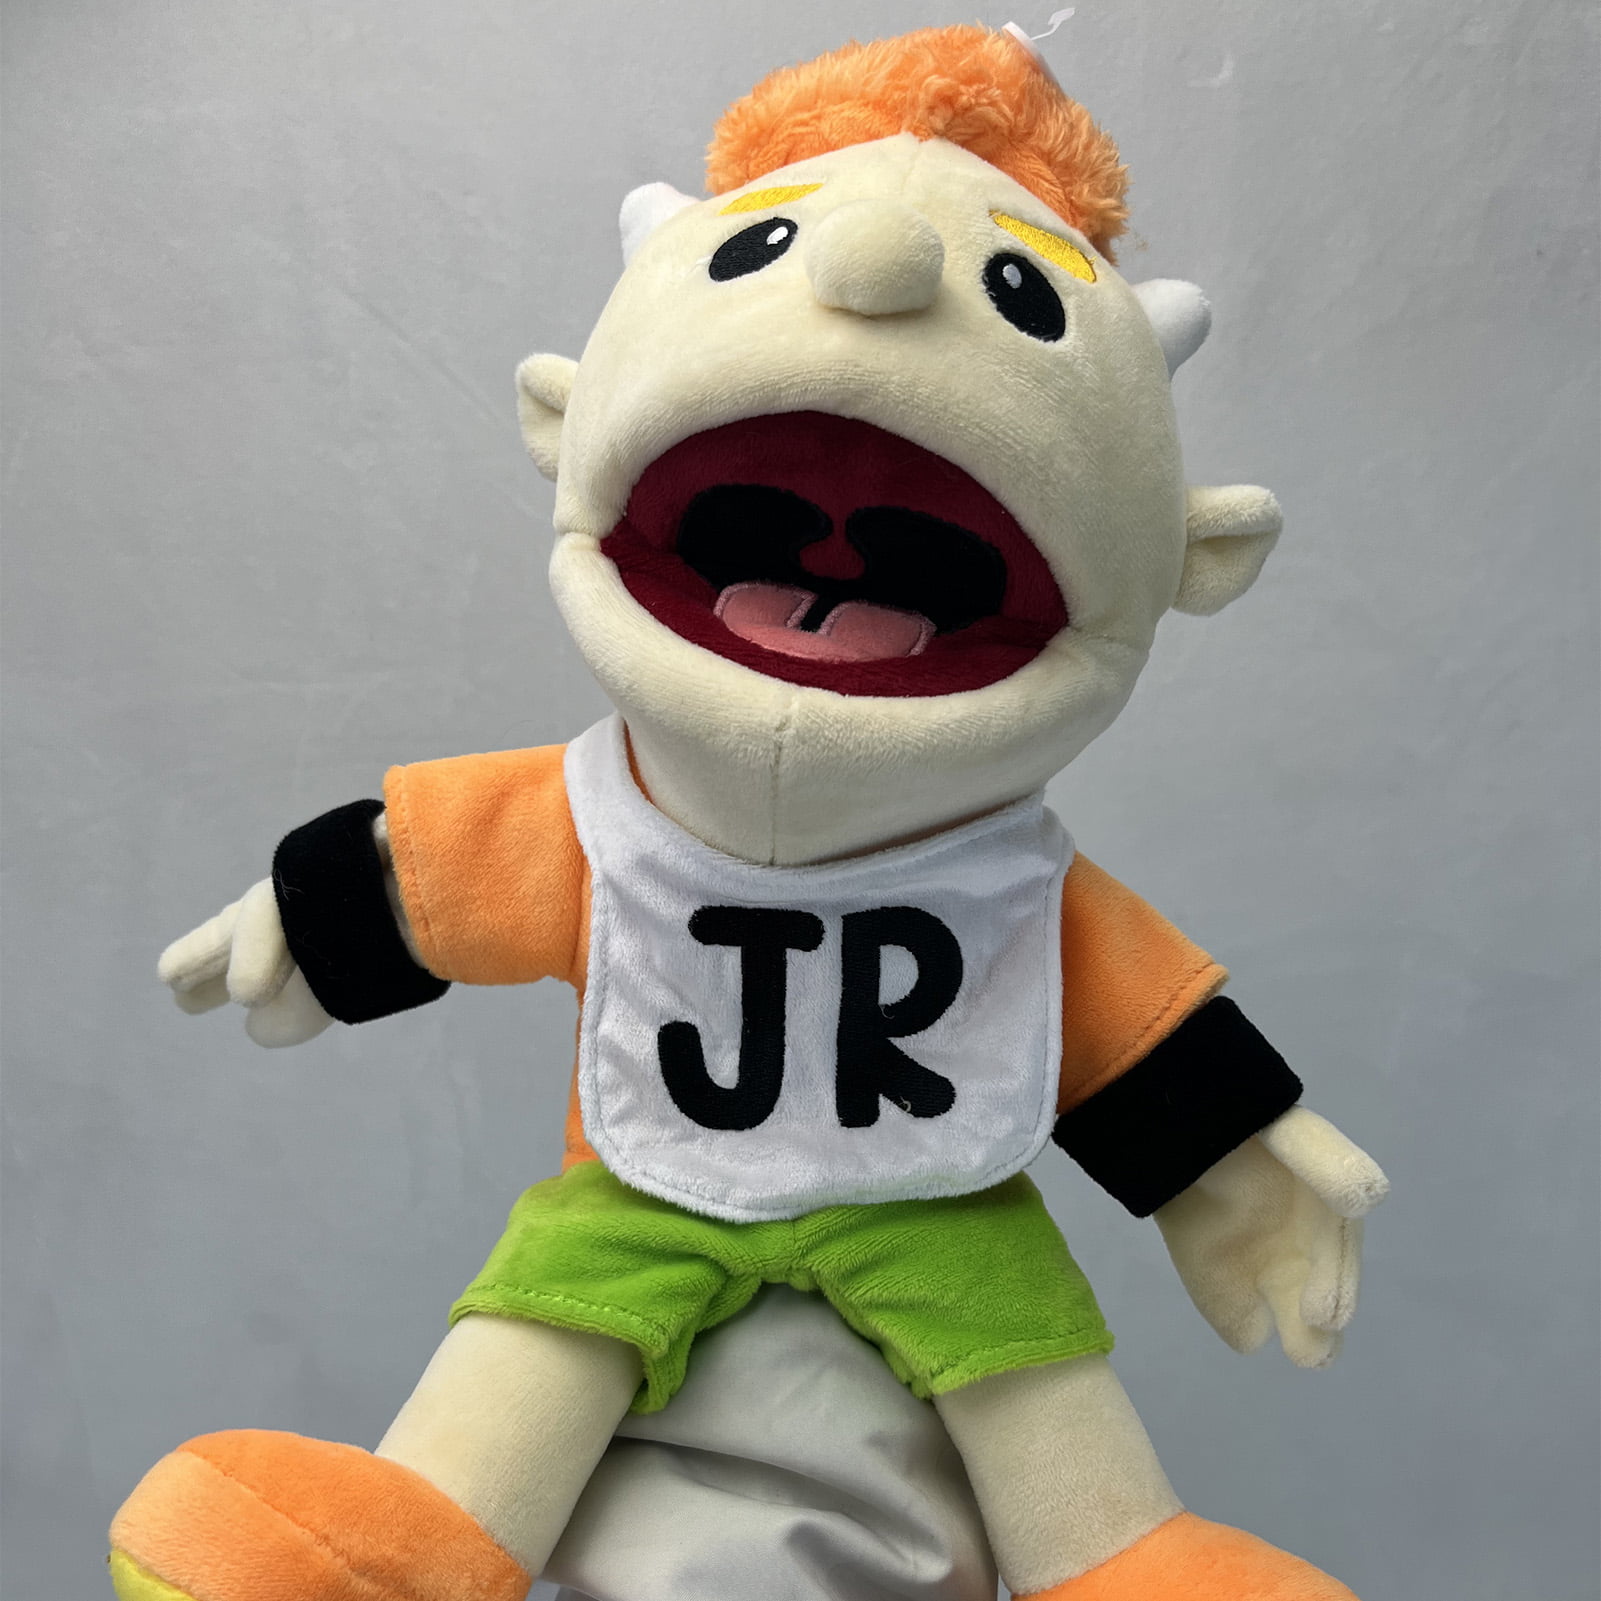 Je-ffy Series Plush Hand Puppet, Hand Puppet Prank Puppet with Working Mouth,  Jos-eph Puppet Soft Plush, Cute Game Series Hand Puppets Soft Stuffed Doll,  for Kids Role-Play, and Storytelling, Hand Puppets 